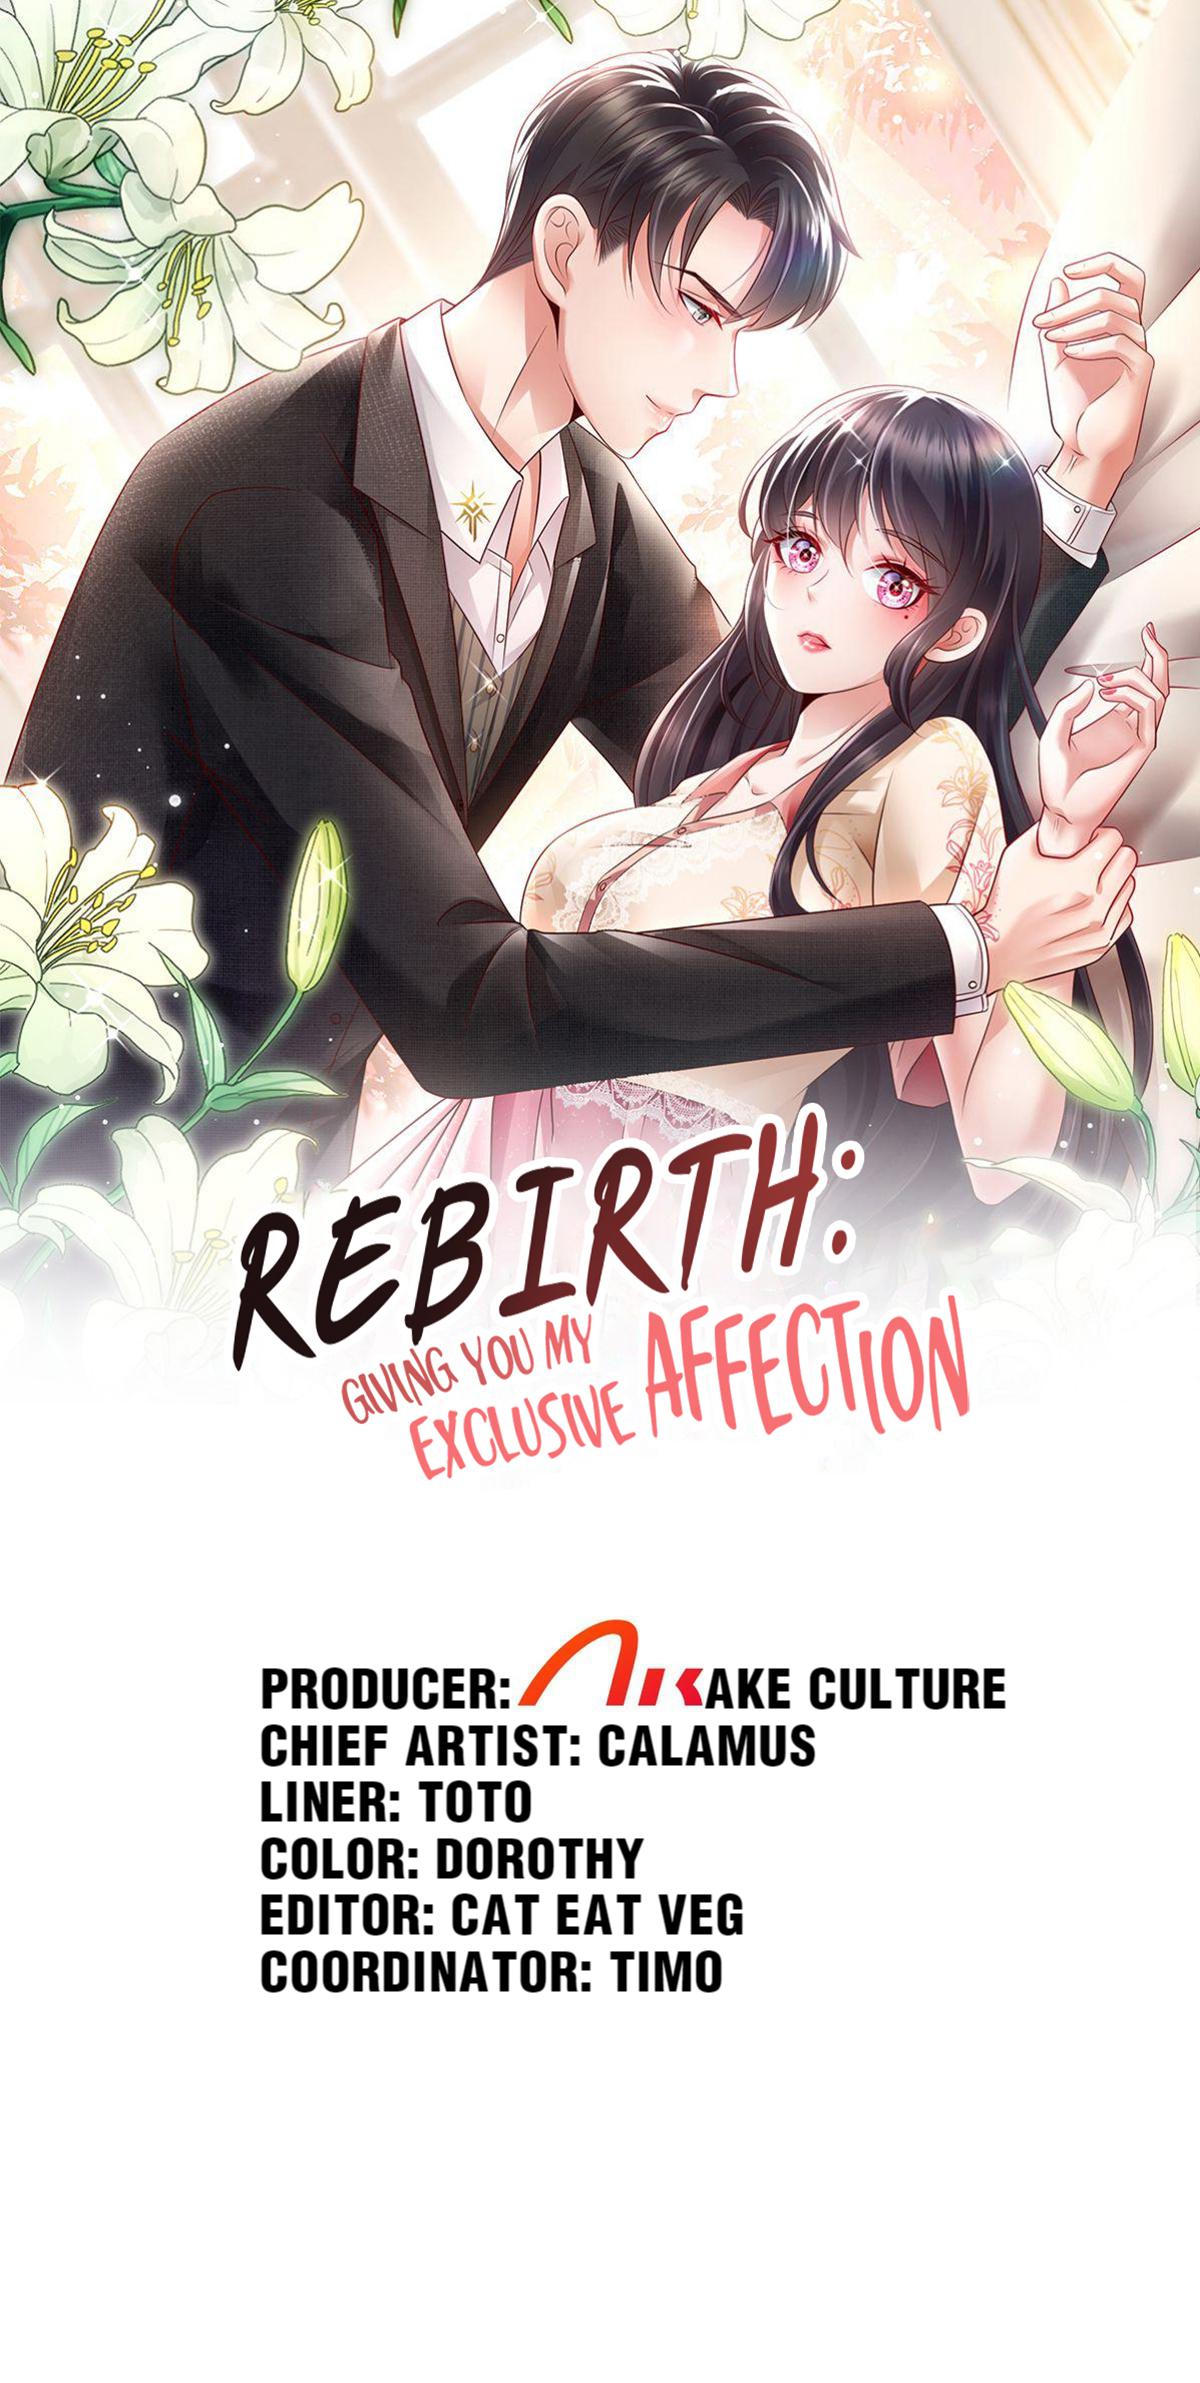 Rebirth: Giving You My Exclusive Affection 69